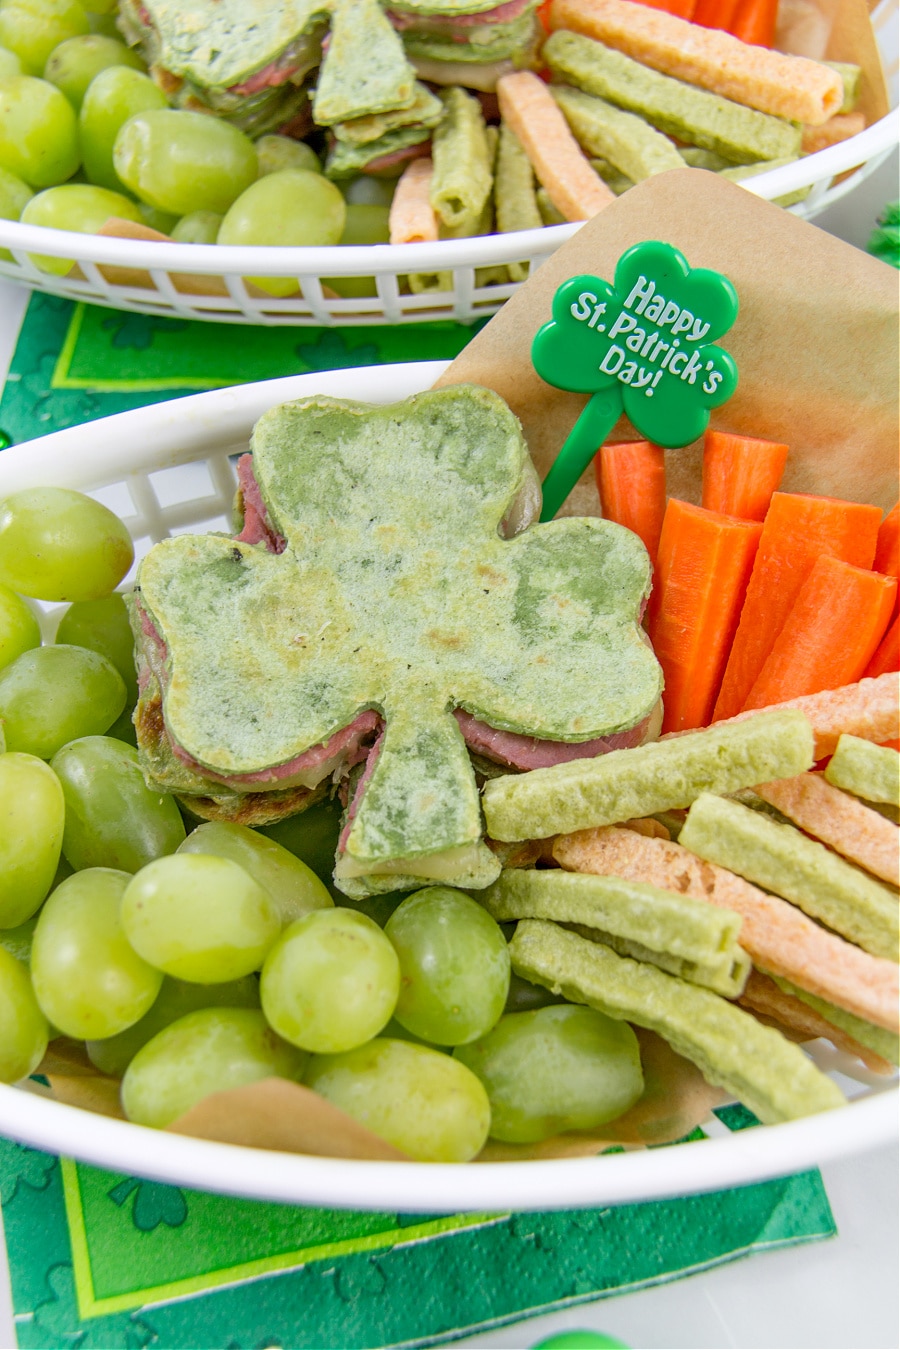 healthy st patricks day lunch for kids including a shamrock quesadilla, veggie straws, carrots, and grapes